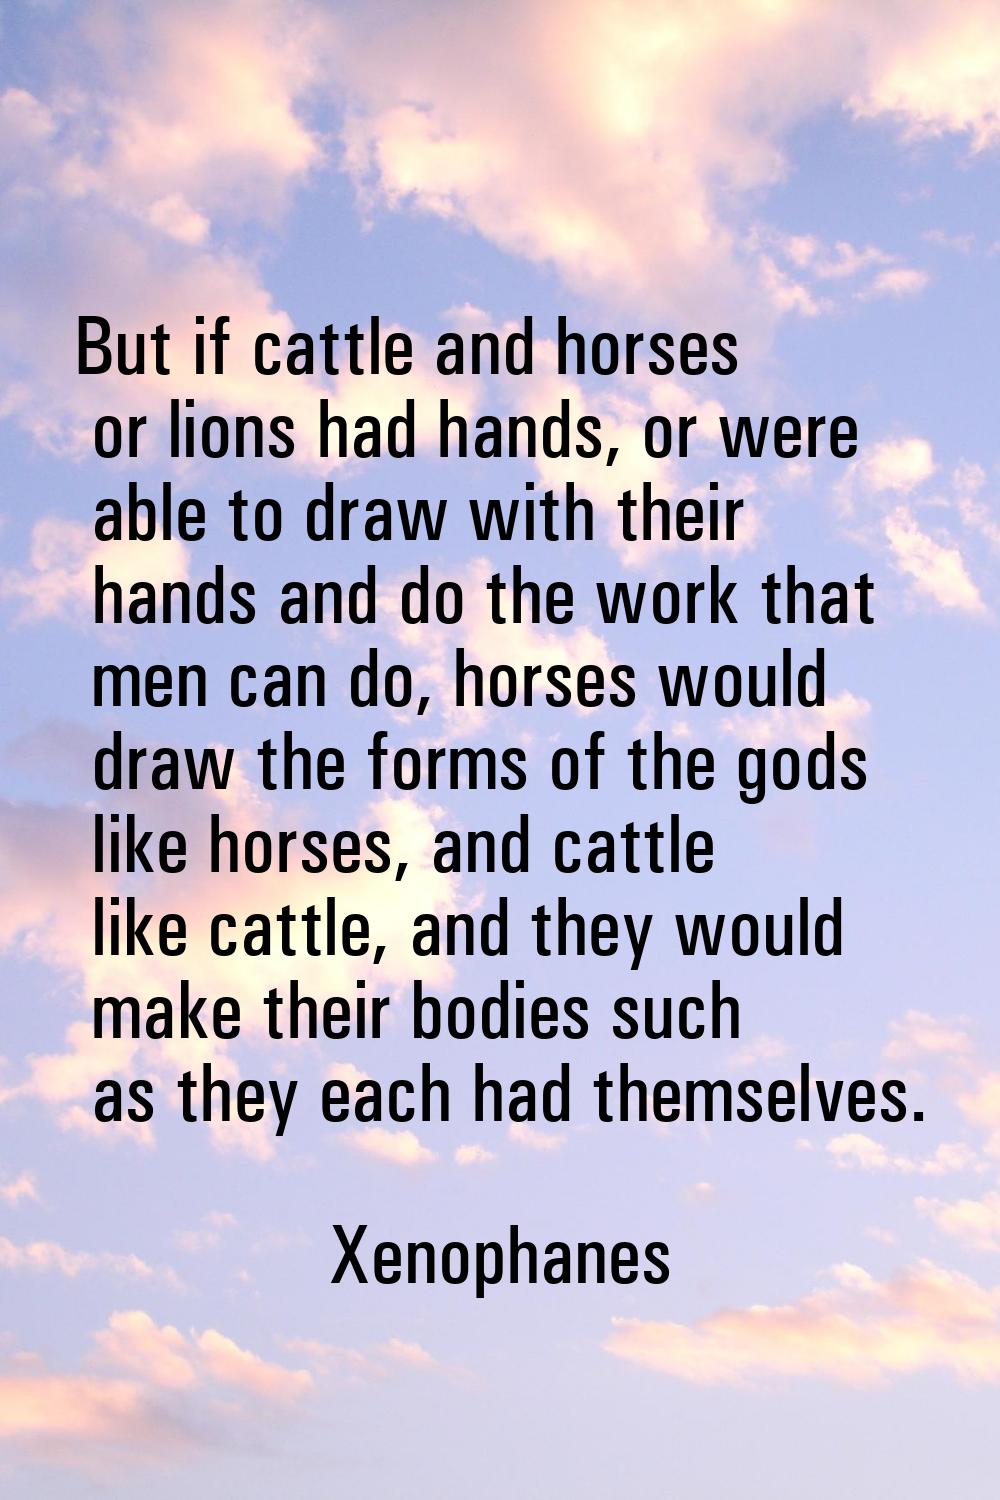 But if cattle and horses or lions had hands, or were able to draw with their hands and do the work 